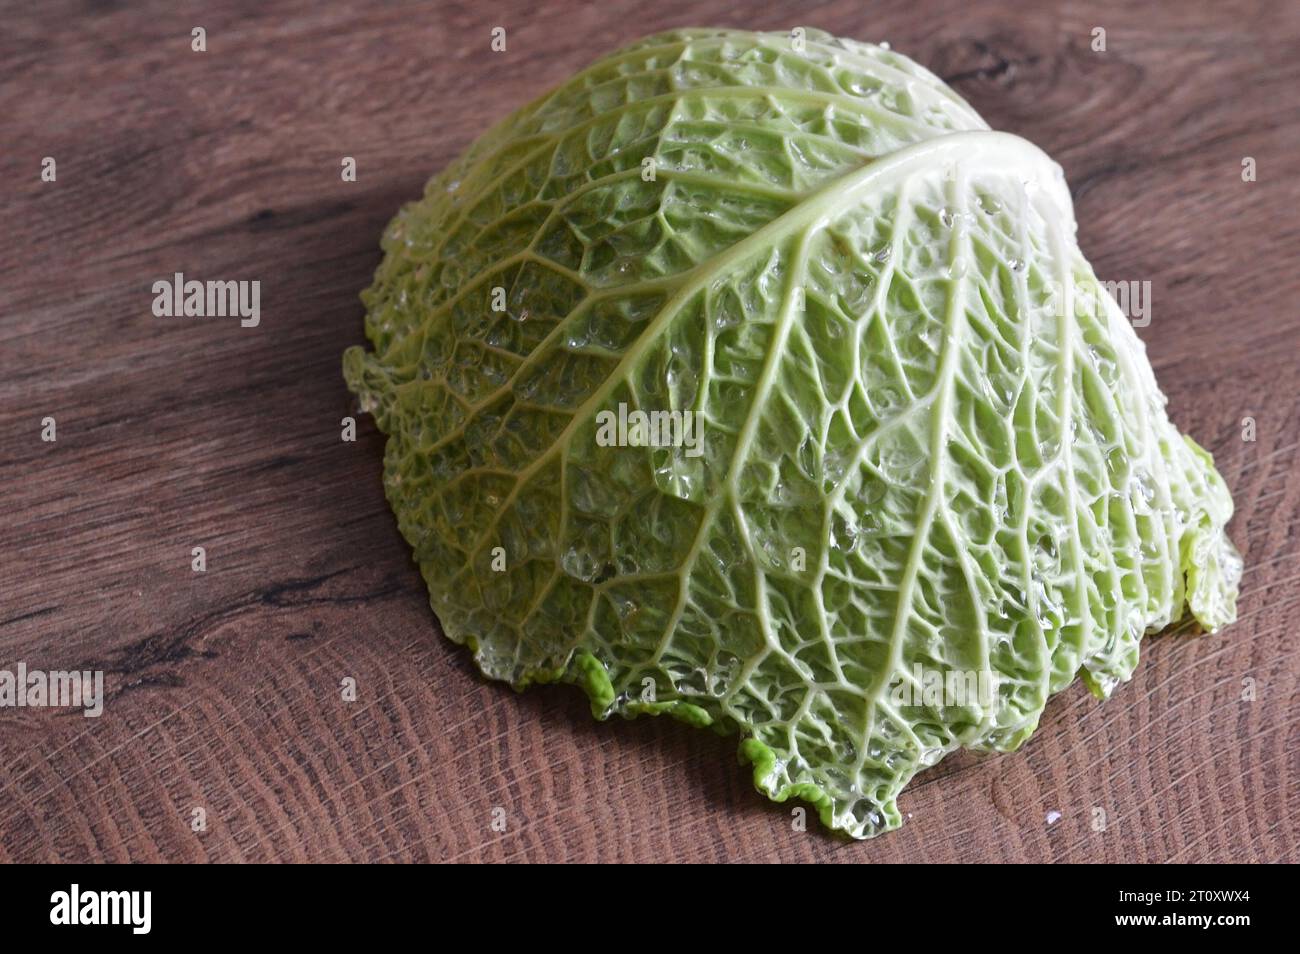 Raw savoy cabbage leaf on wooden background Stock Photo